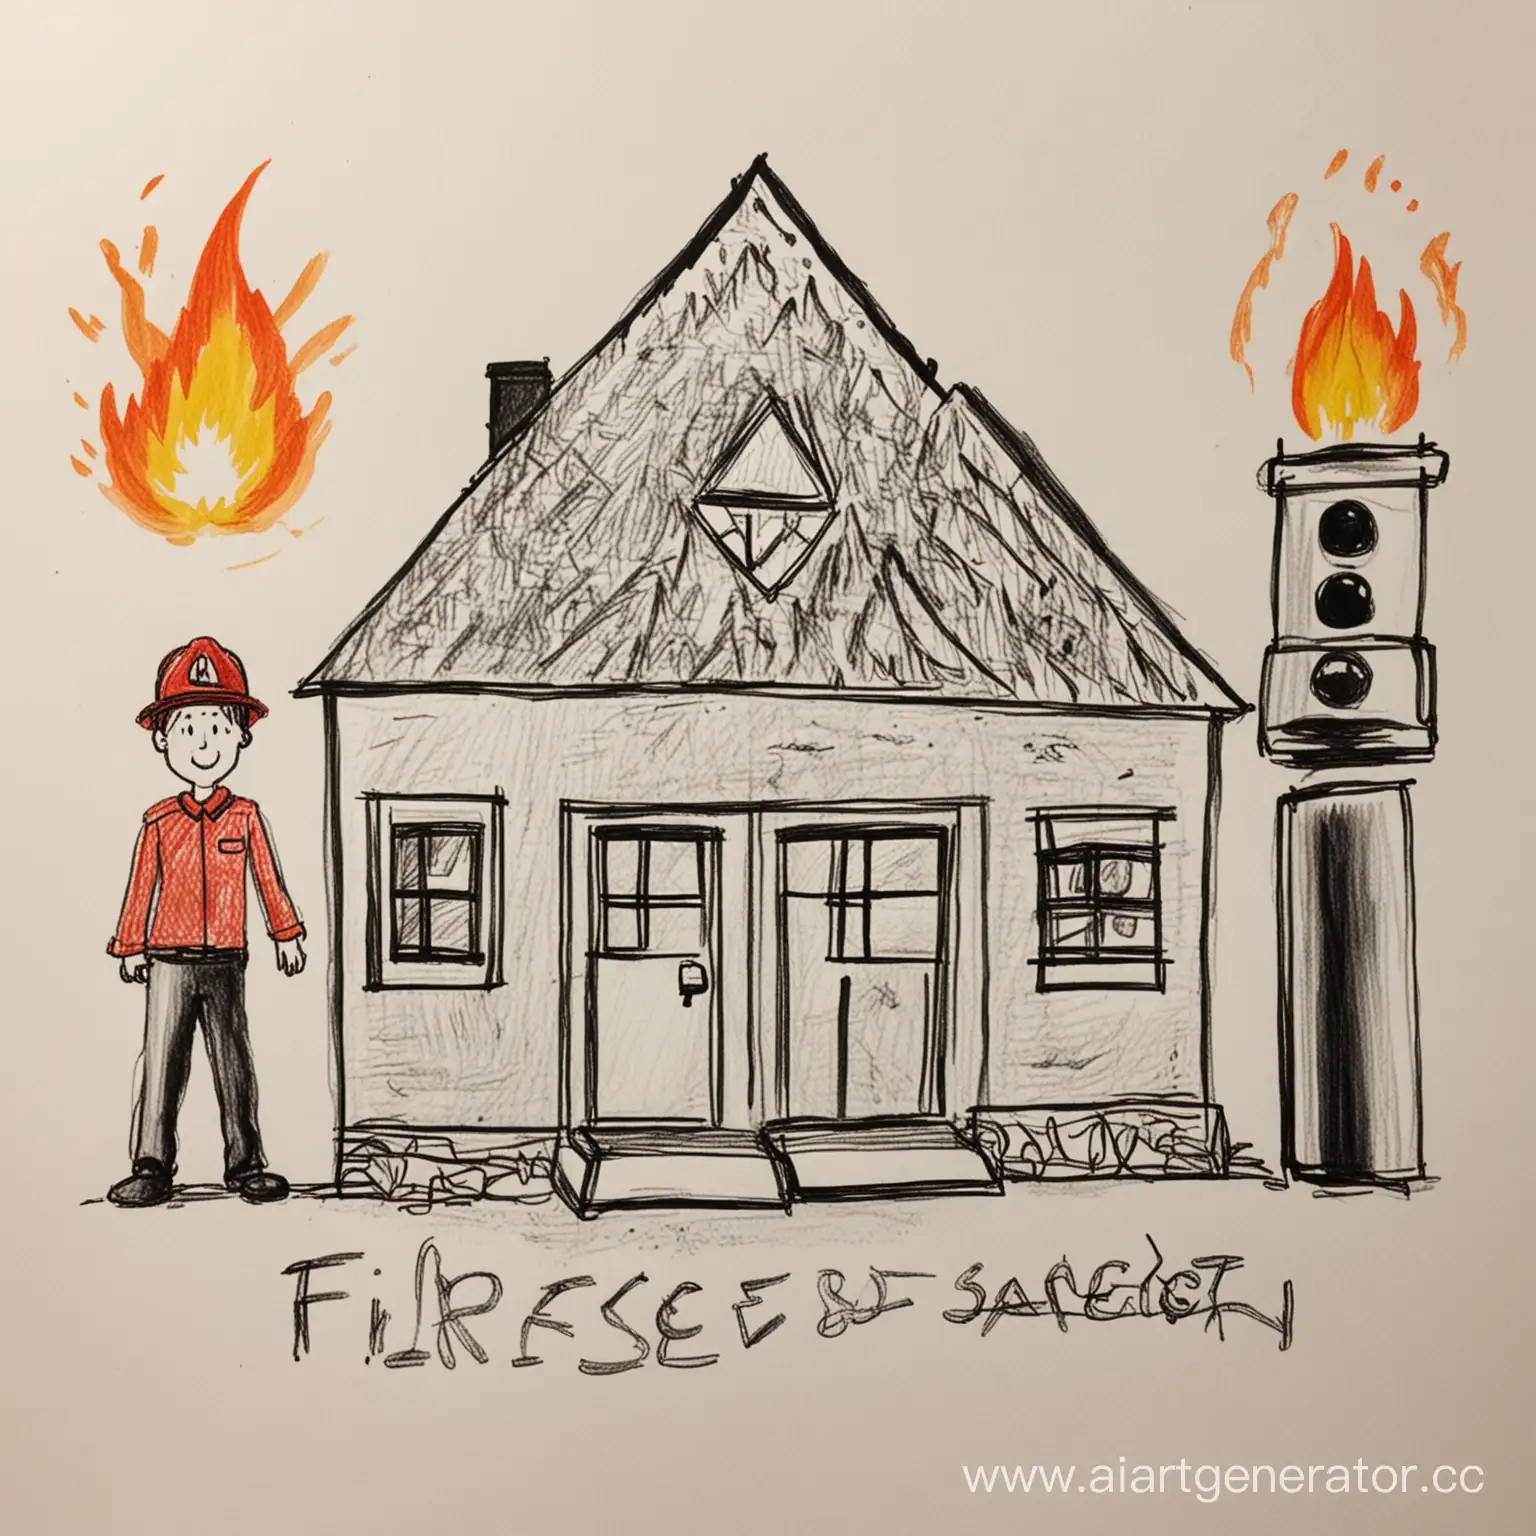 Childs-Marker-Drawing-Fire-Safety-Precautions